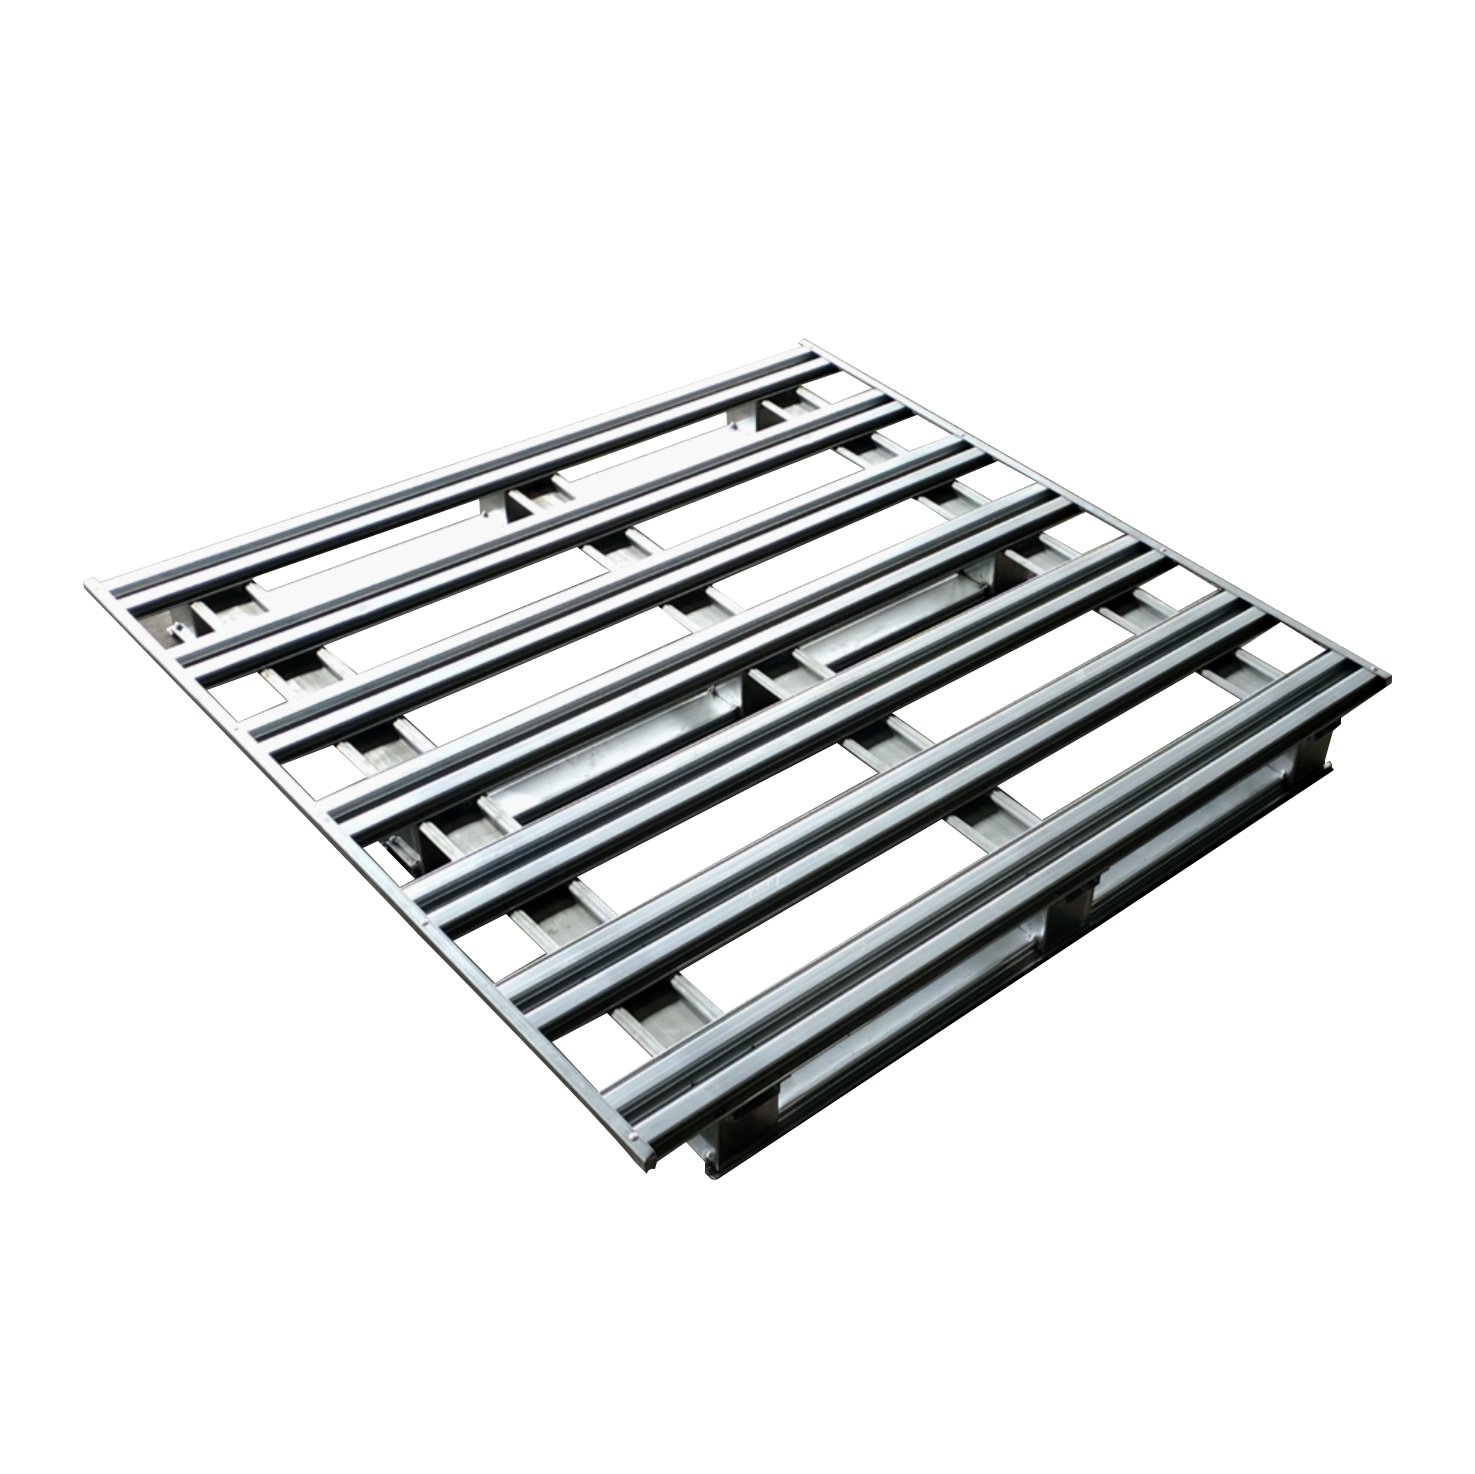 What are the excellent properties of aluminum alloy cable tray?